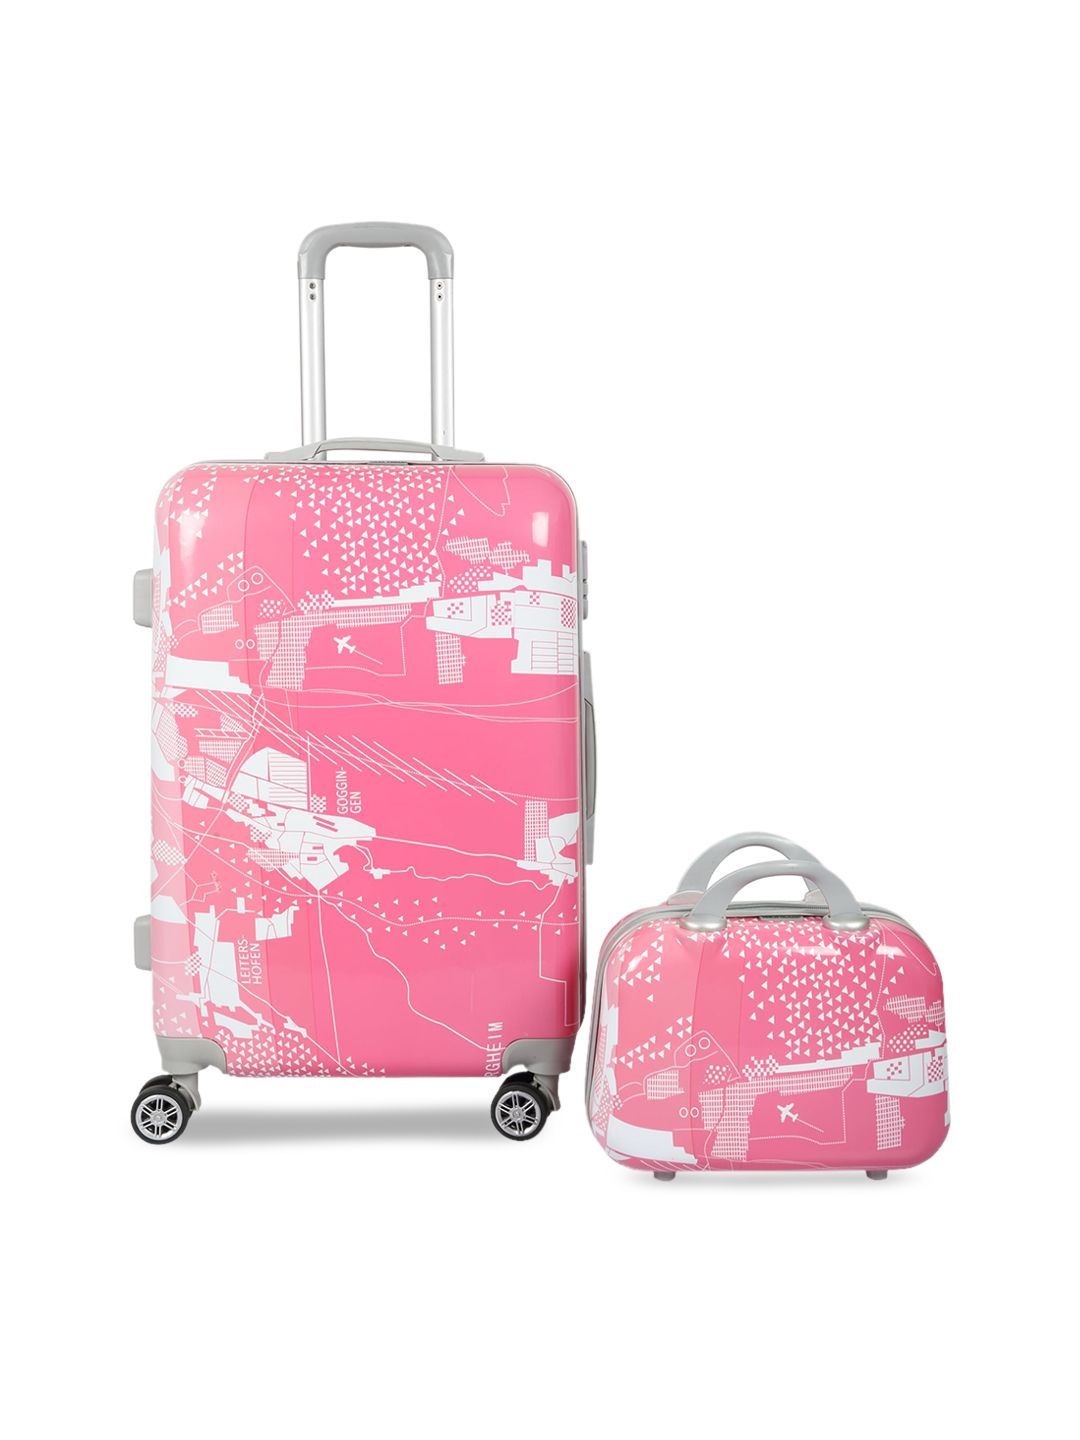 Polo Class Pink Trolley Bag with Vanity Bag Price in India